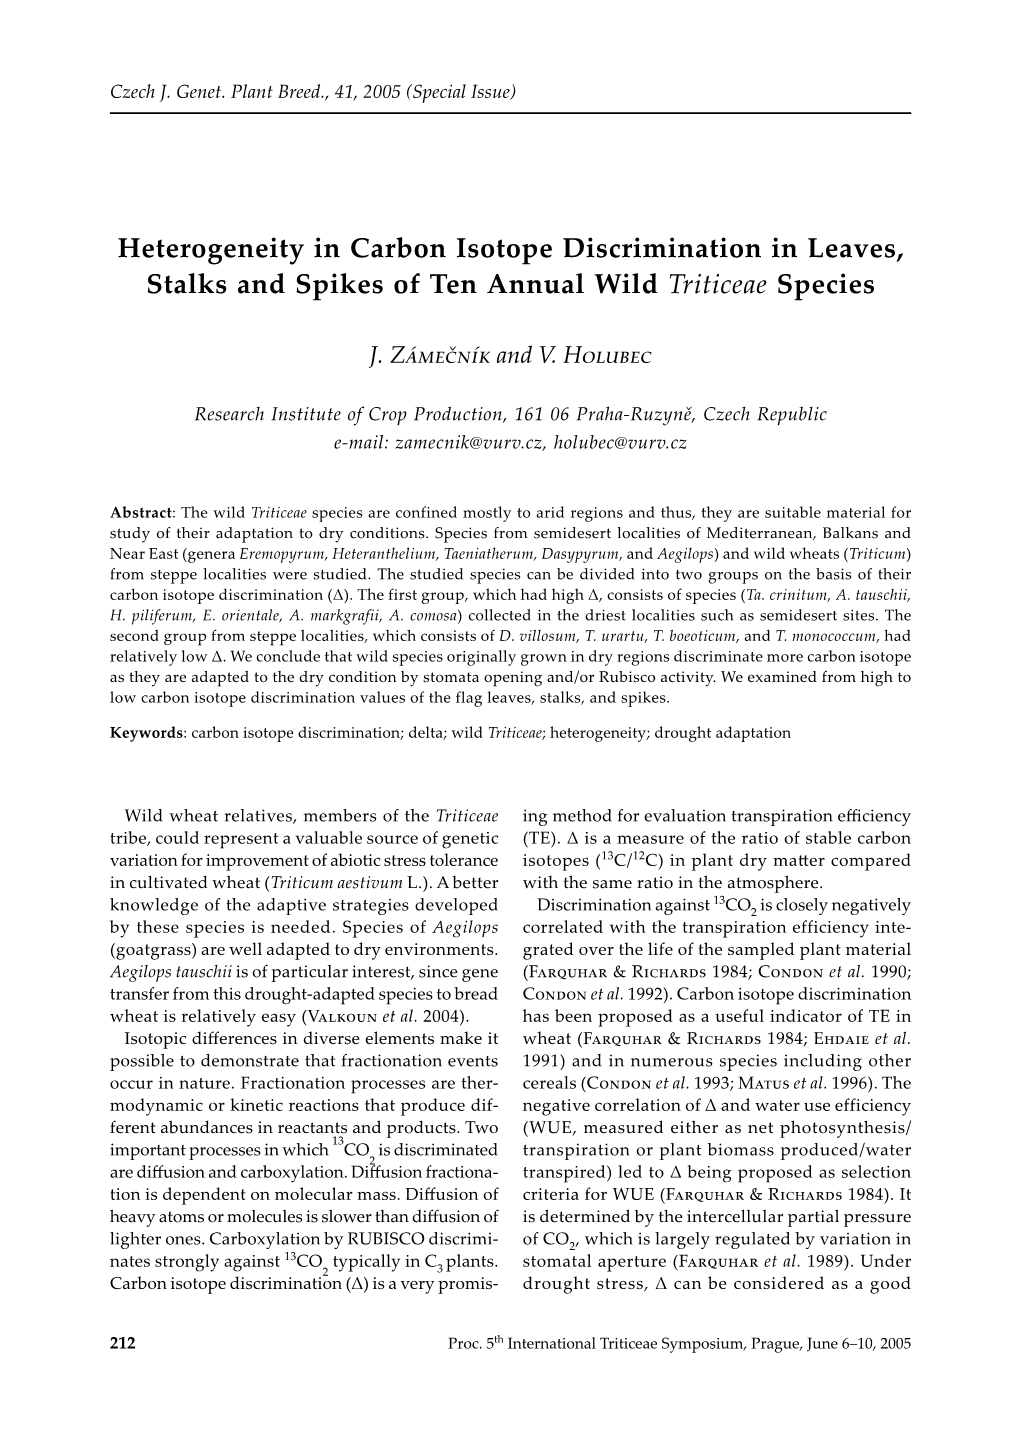 Heterogeneity in Carbon Isotope Discrimination in Leaves, Stalks and Spikes of Ten Annual Wild Triticeae Species